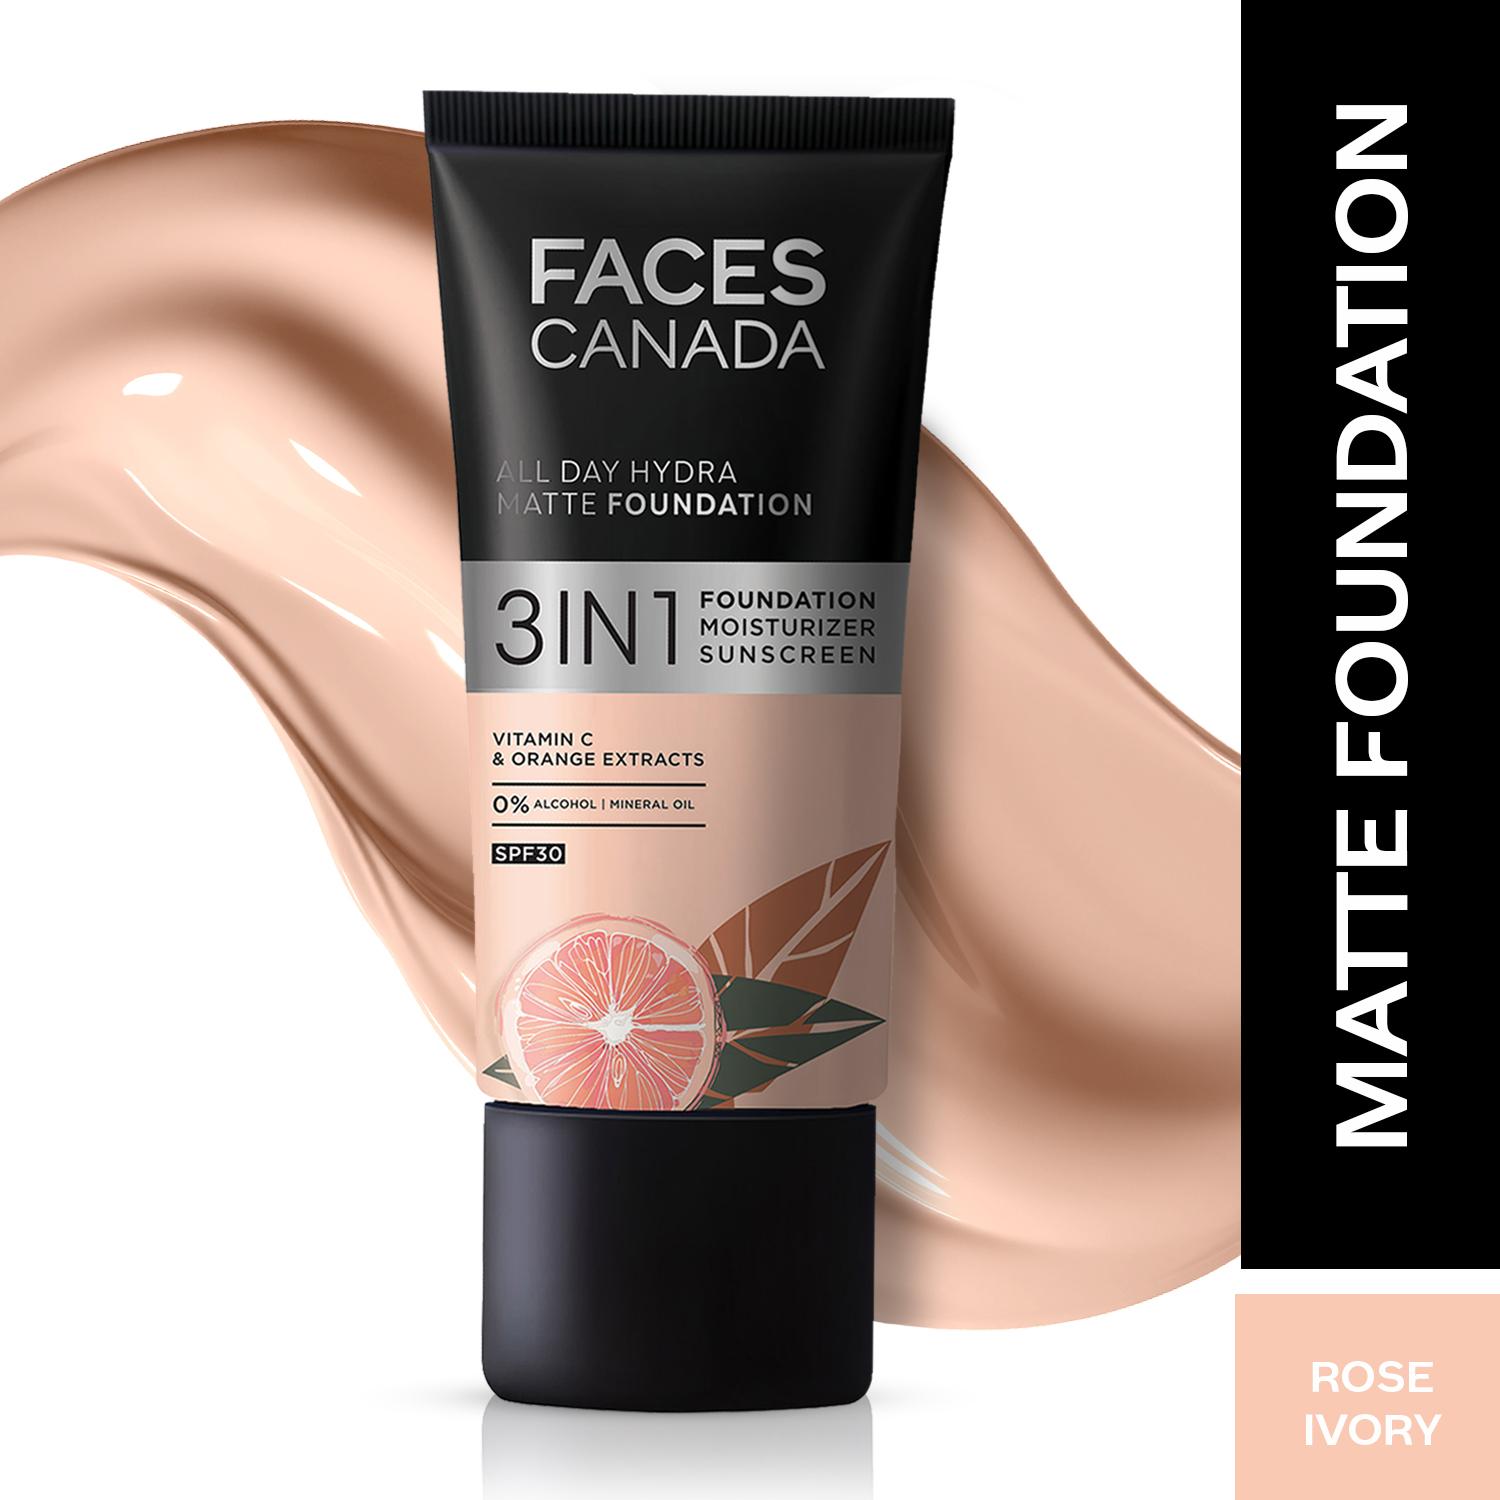 Faces Canada | Faces Canada 3in1 All Day Hydra Matte Foundation + Moisturizer + SPF 30 - Rose Ivory 011 (25 ml)